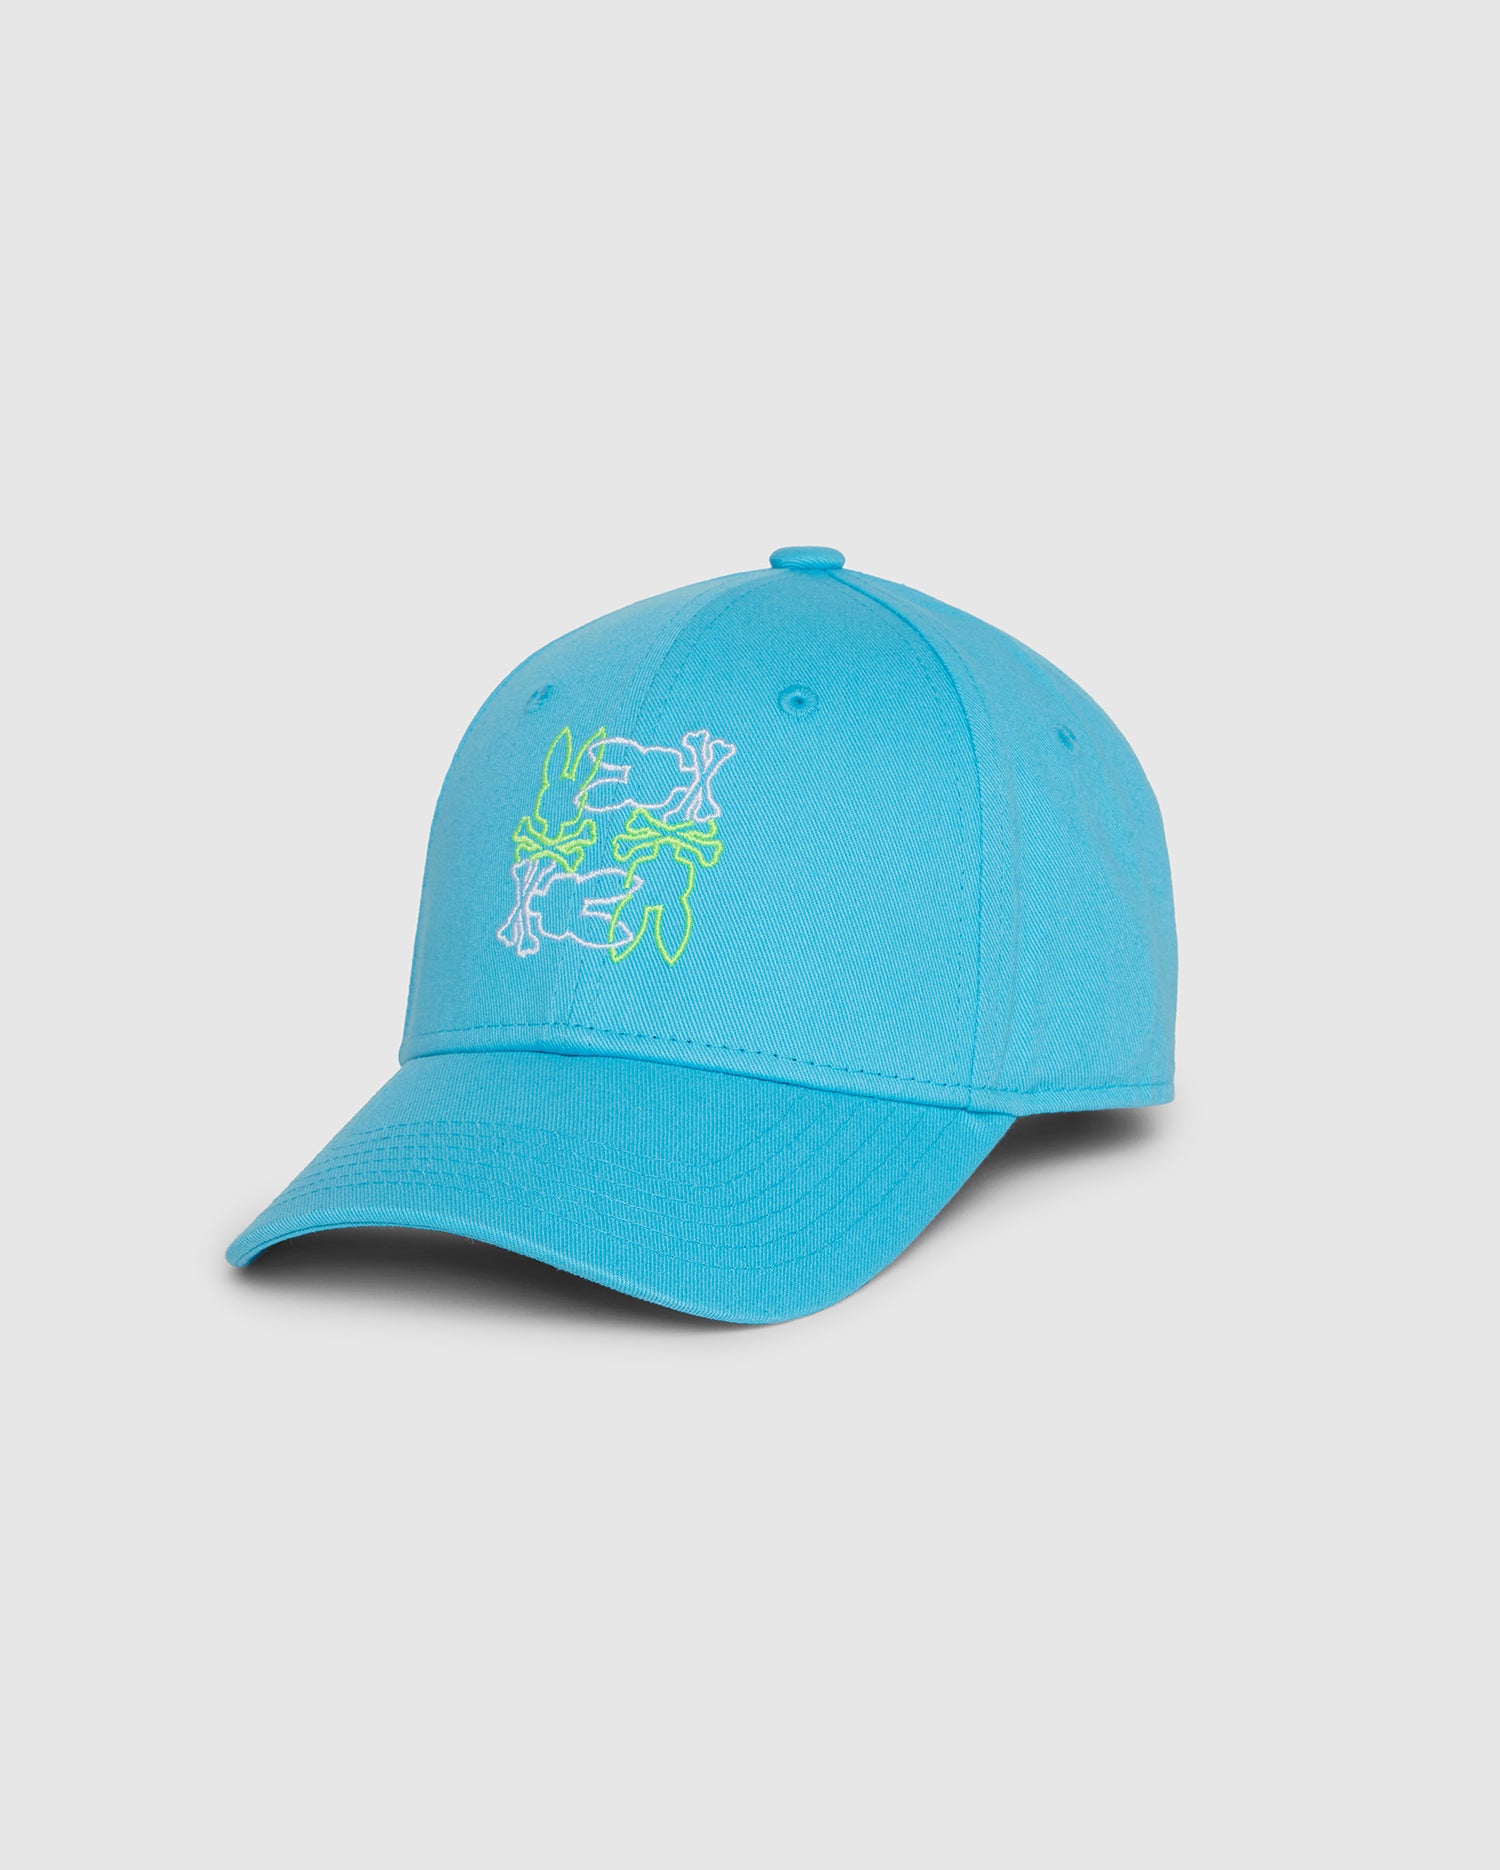 A high-quality, bright blue Psycho Bunny KIDS RODMAN BASEBALL CAP - B0A124B2HT with a slightly curved brim. The front panel features an embroidered design in white and neon green, depicting abstract line art. This stylish wardrobe accessory is set against a plain white background.